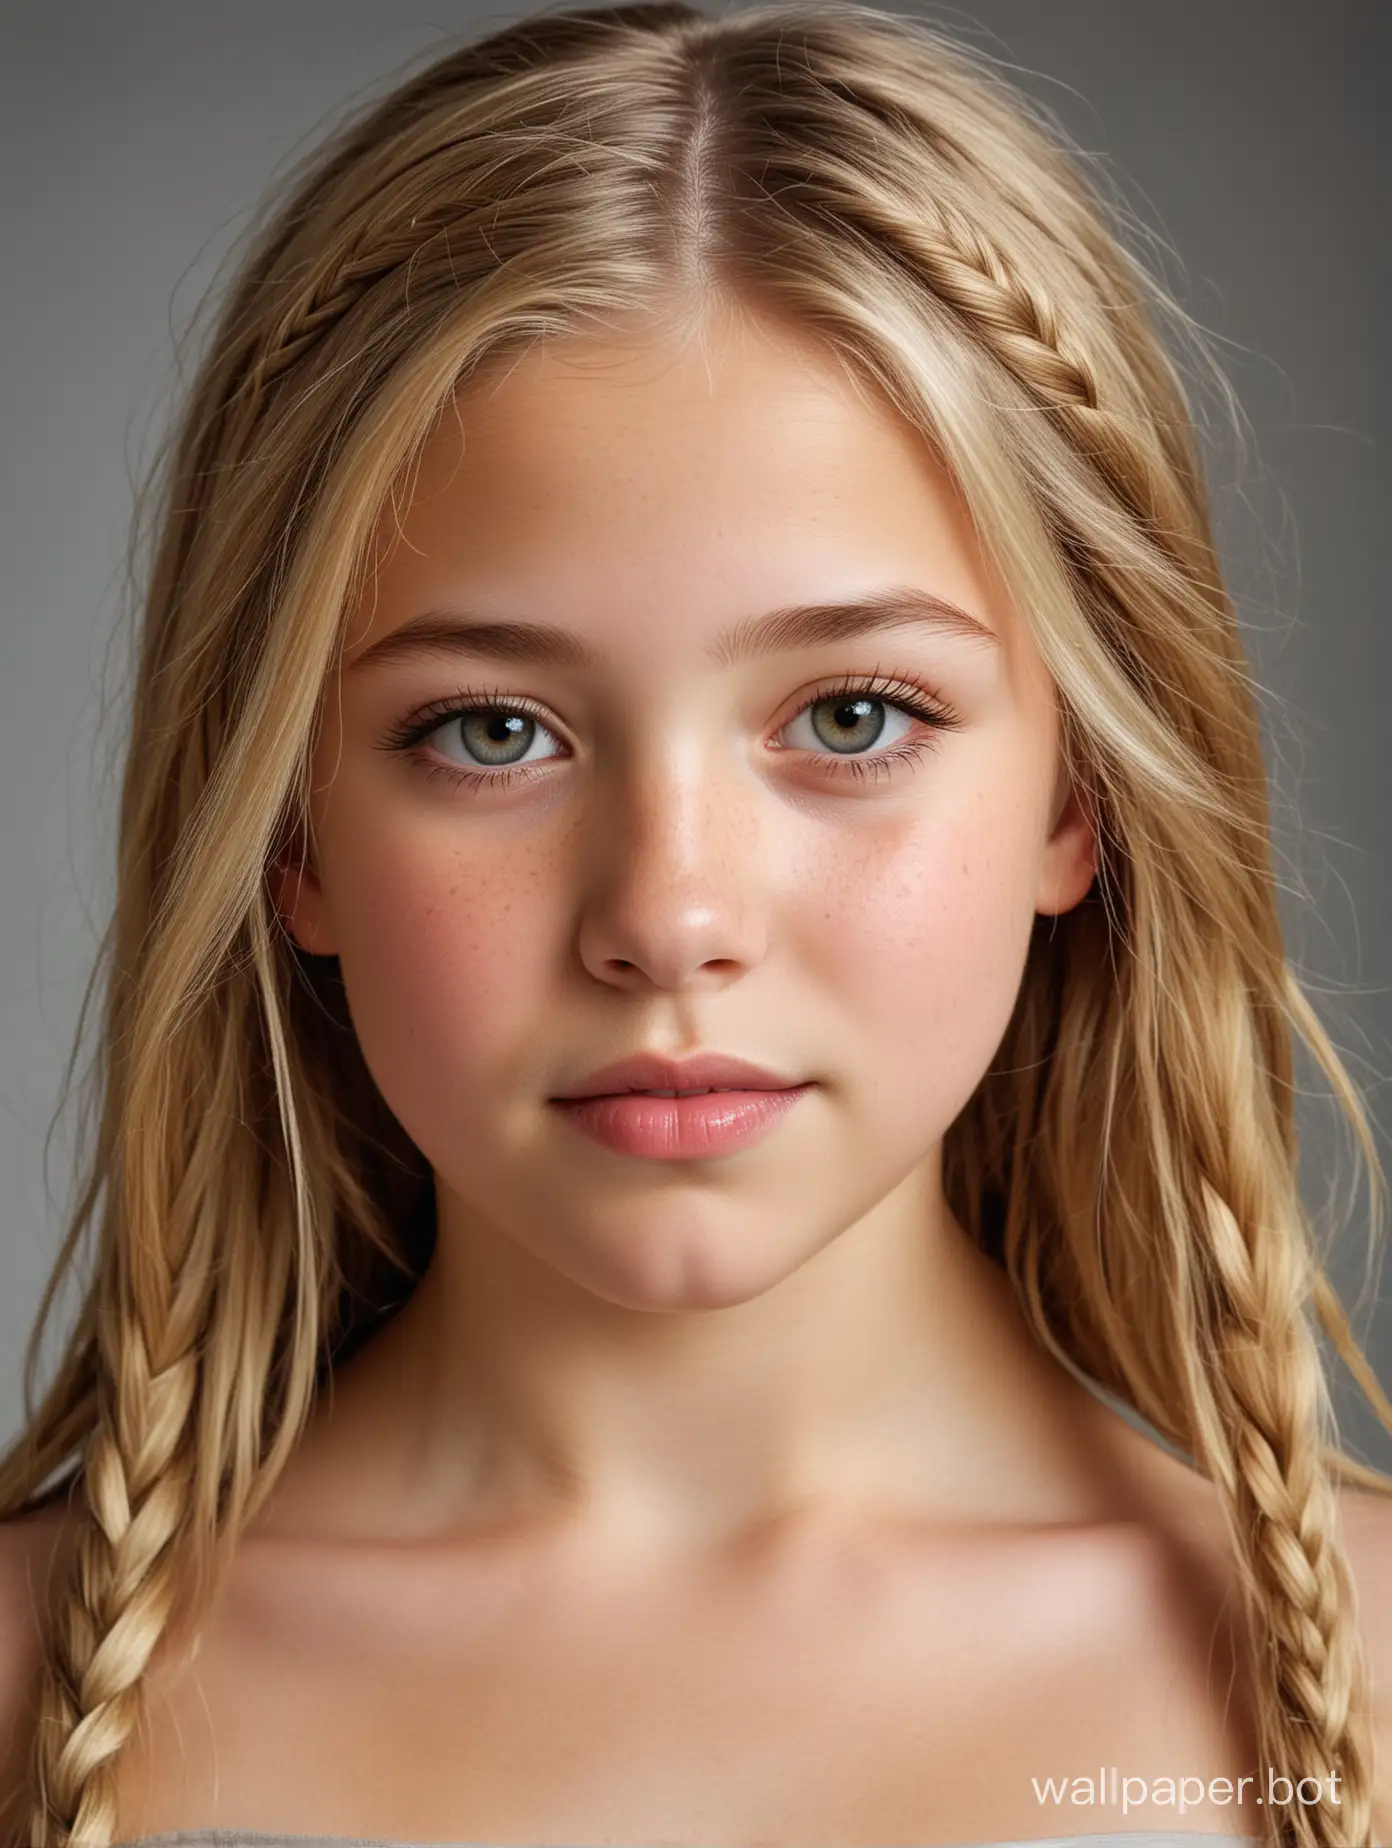 Professional studio portrait photograph with the most intricate detail. A beautiful little 10 year old preteen Caucasian girl. She has a perfect most gorgeous alluring little preteen child face, slight freckles, blonde braided hair. Serious determined expression. She has a perfect little preteen child body, short stocky stature, tiniest little flat undeveloped preteen child breasts, puffy nipples, slender waist, round broad hips, curvy thighs.